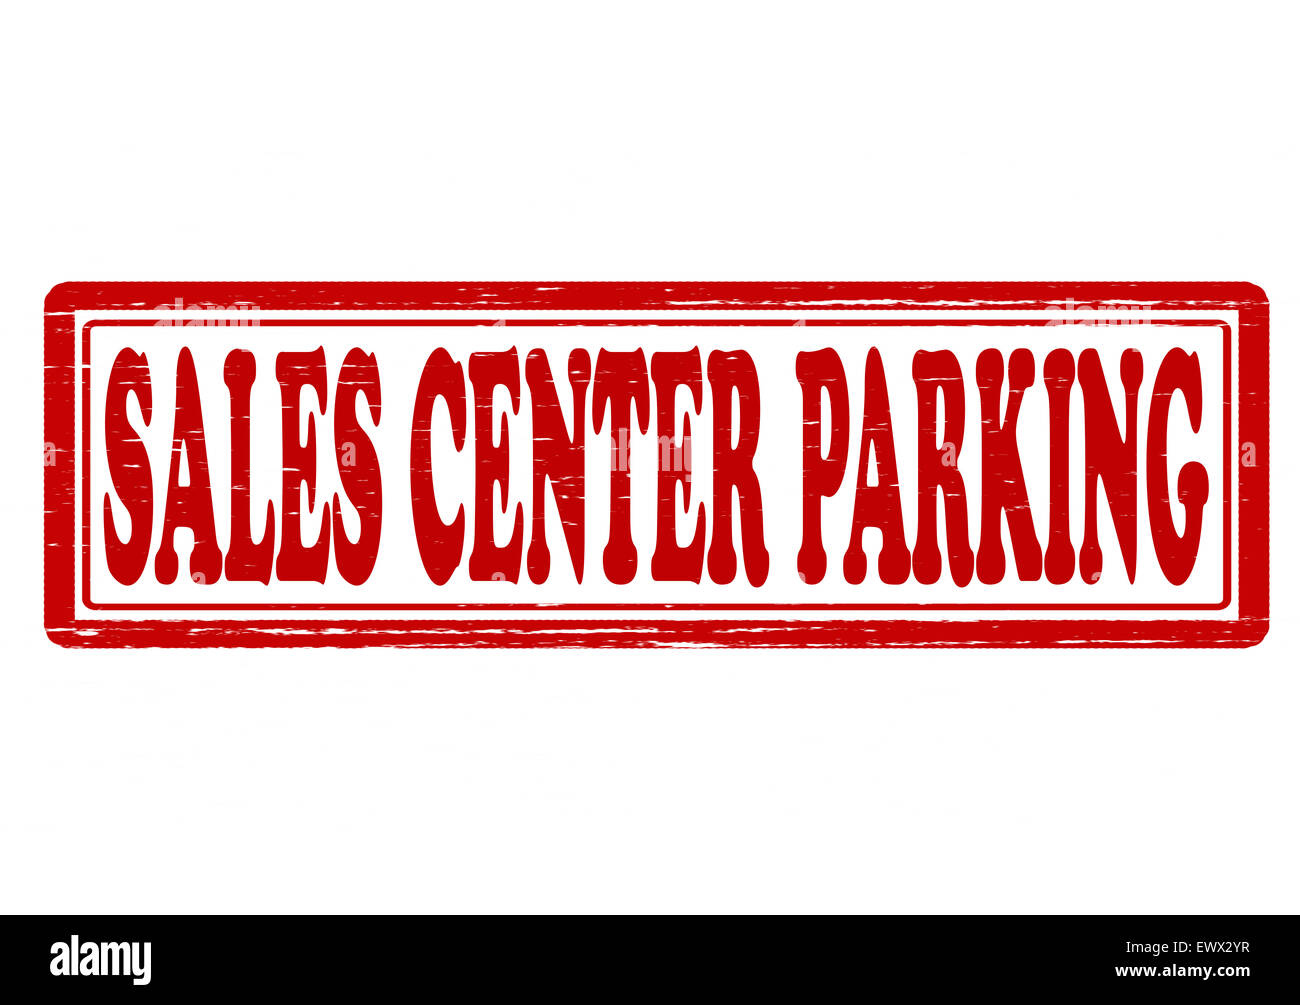 Stamp with text sale center parking inside, illustration Stock Photo